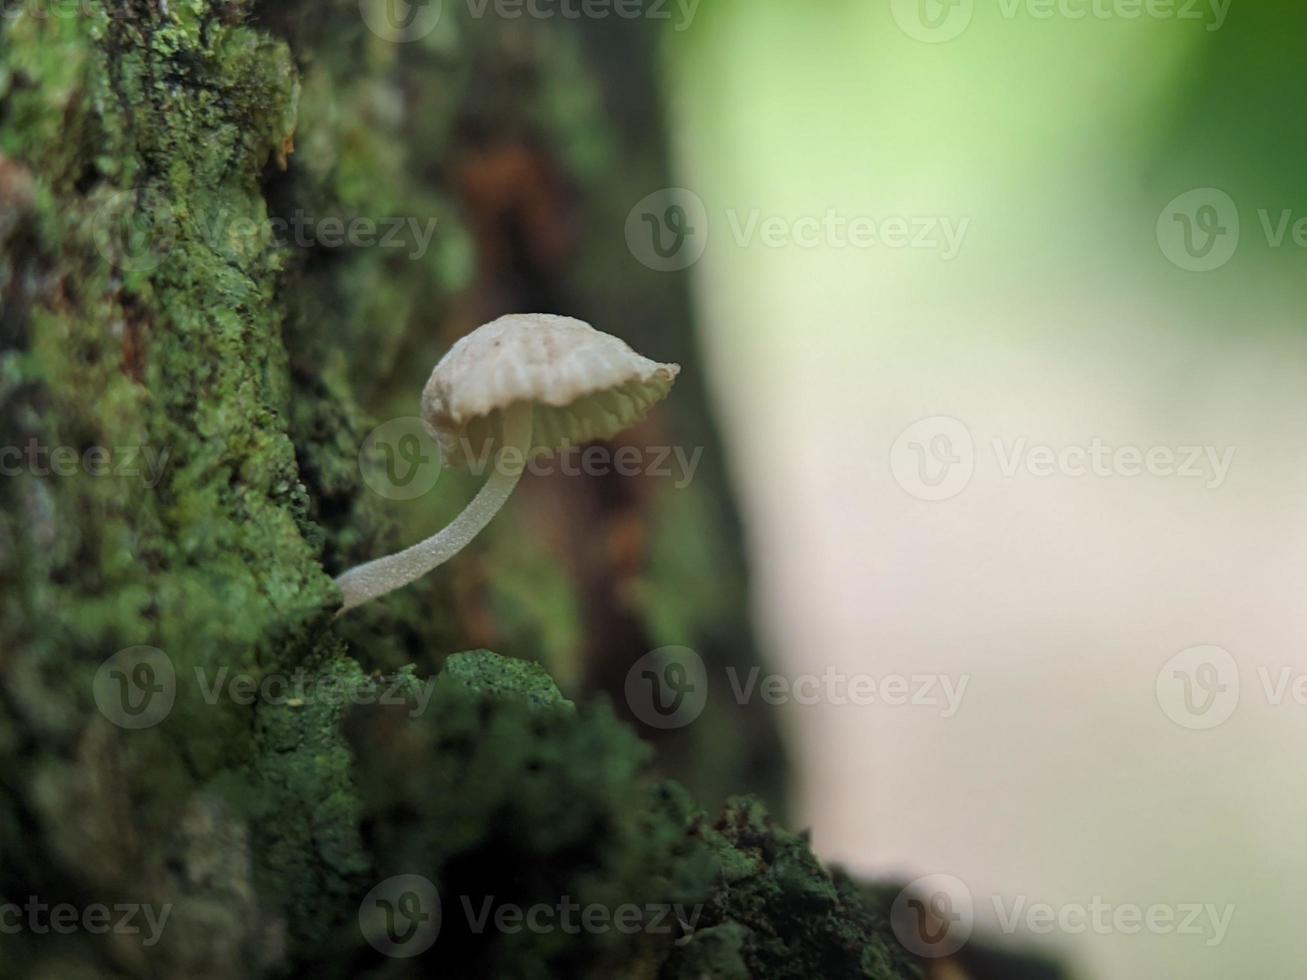 Unique view of a luminous white mushroom growing on a tree trunk photo